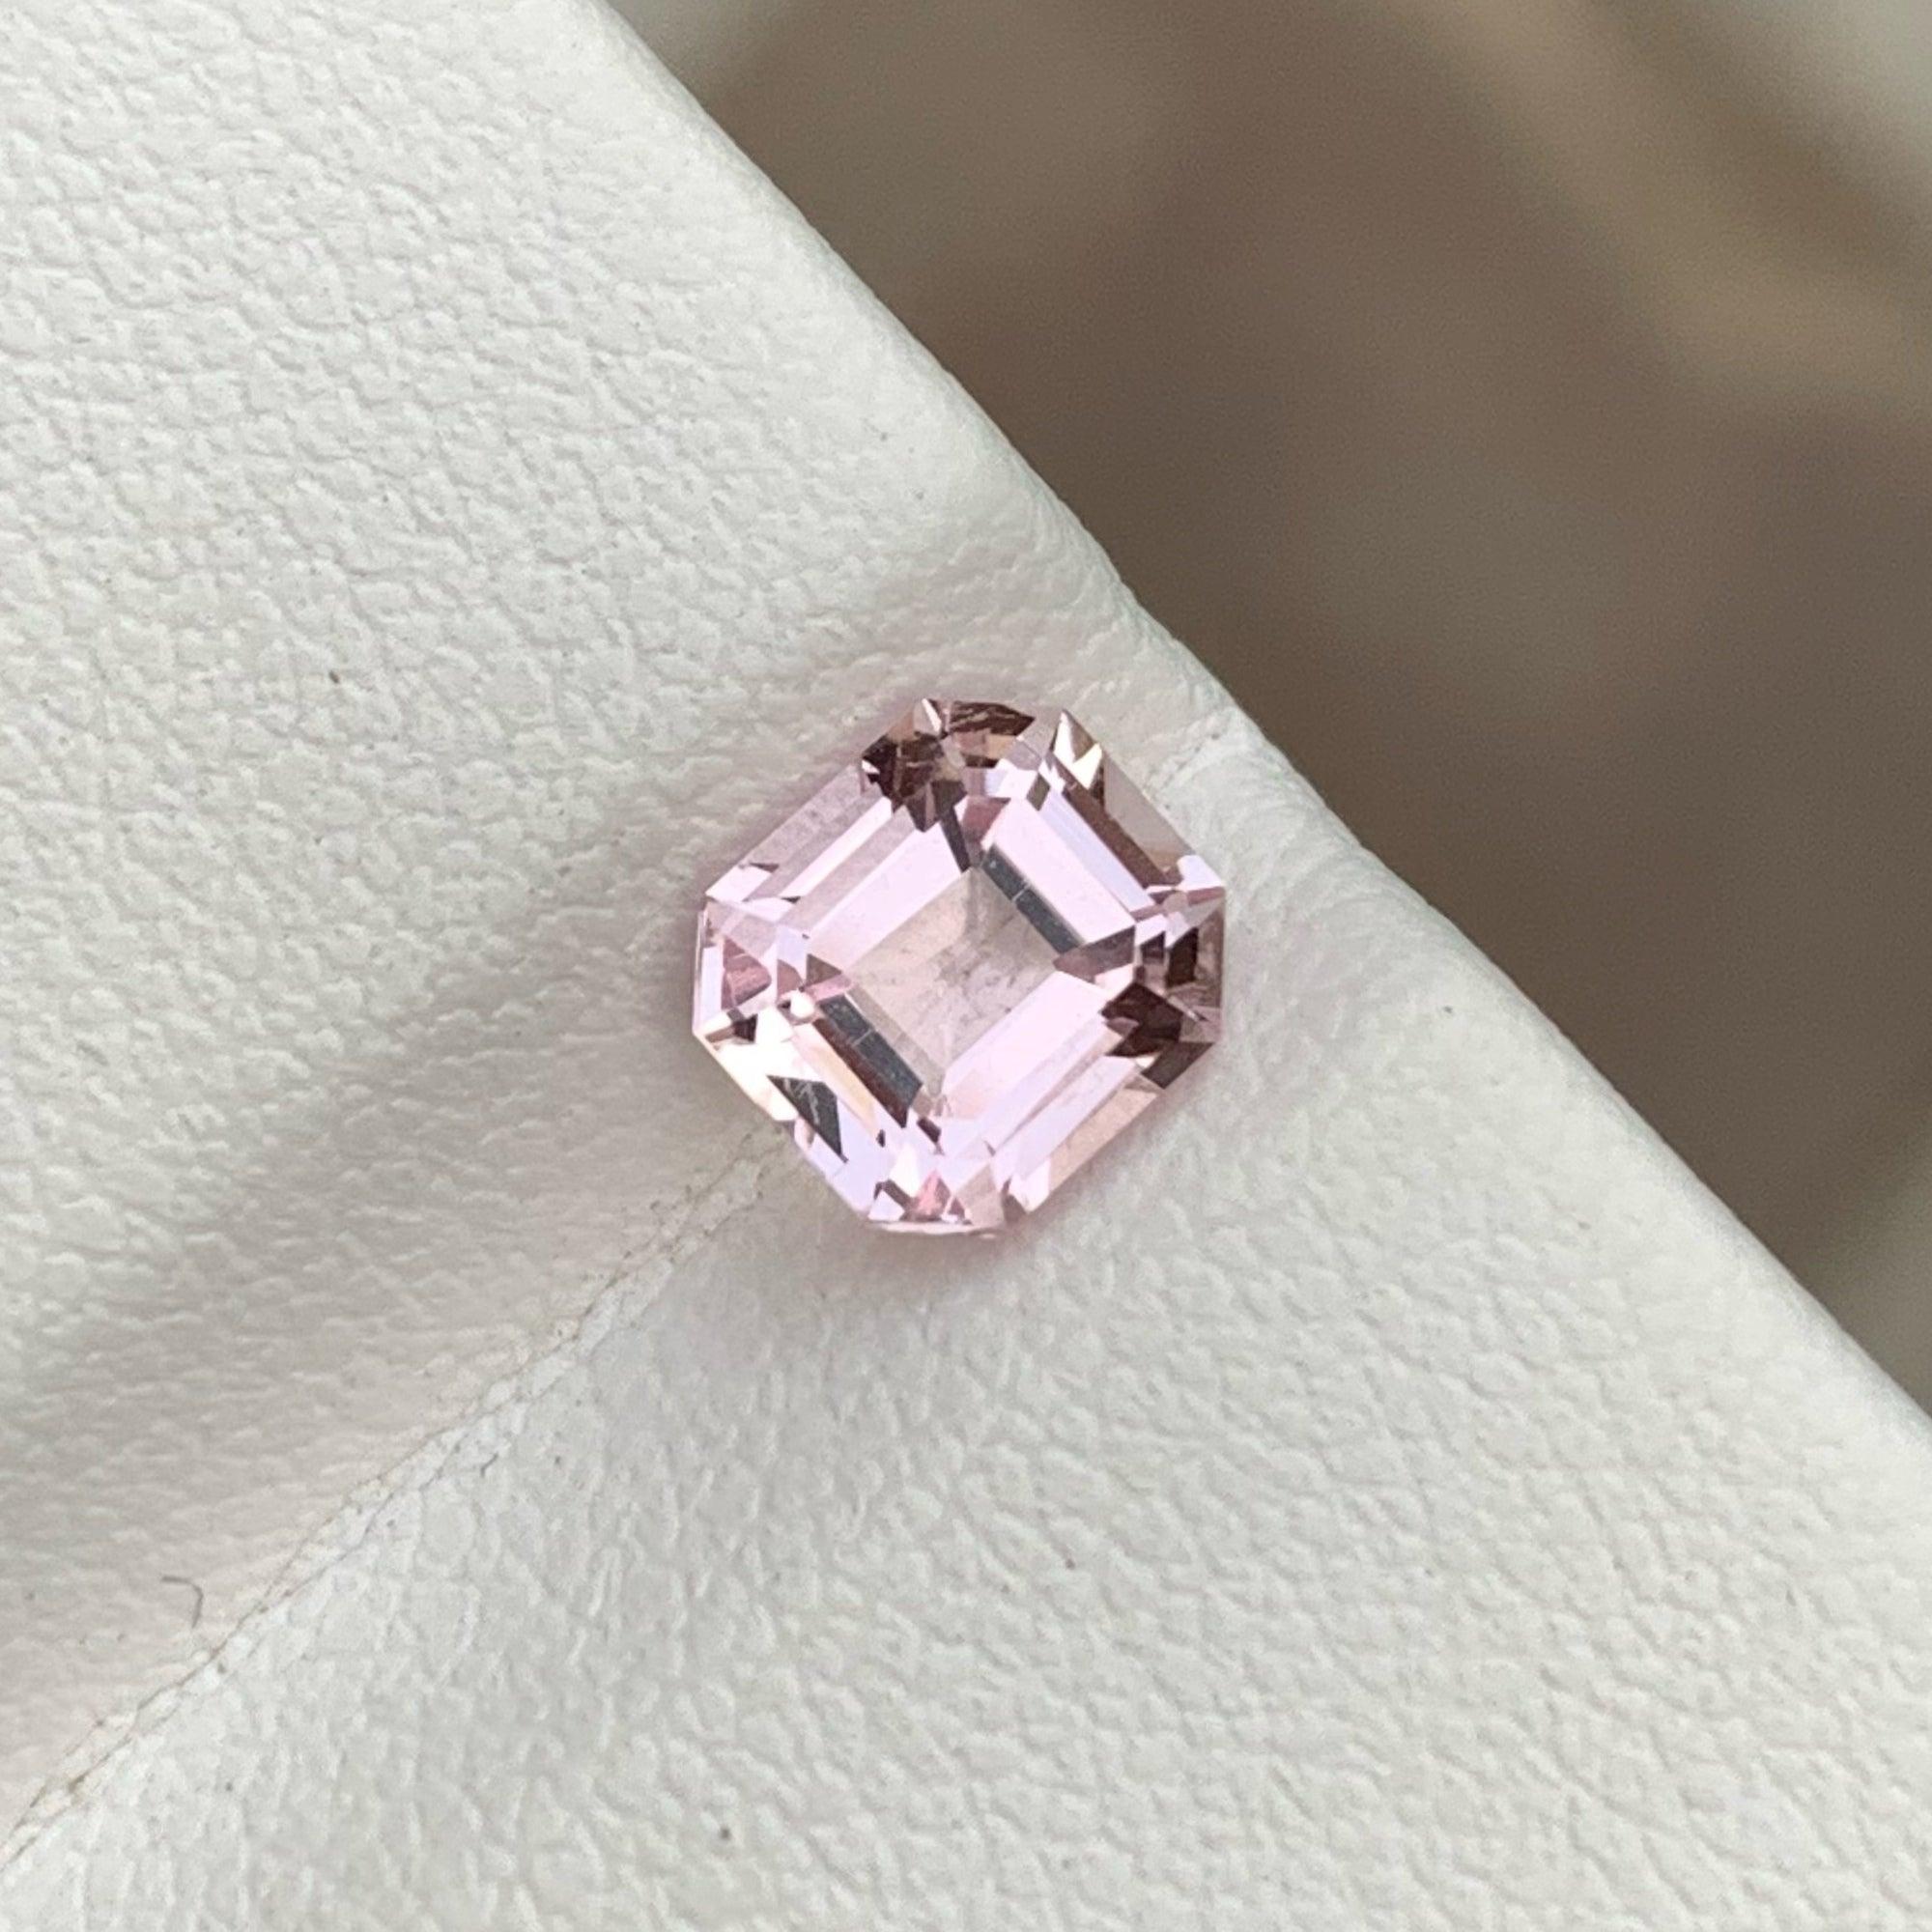 Morganite Gemstone, available For Sale At Wholesale Price Natural High Quality 1.20 Carats Eye Clean Clarity Loose Morganite From Nigeria.

Product Information:
GEMSTONE TYPE:	Dazzling Natural Pink Loose Morganite
WEIGHT:	1.20 carats
DIMENSIONS:	6.5